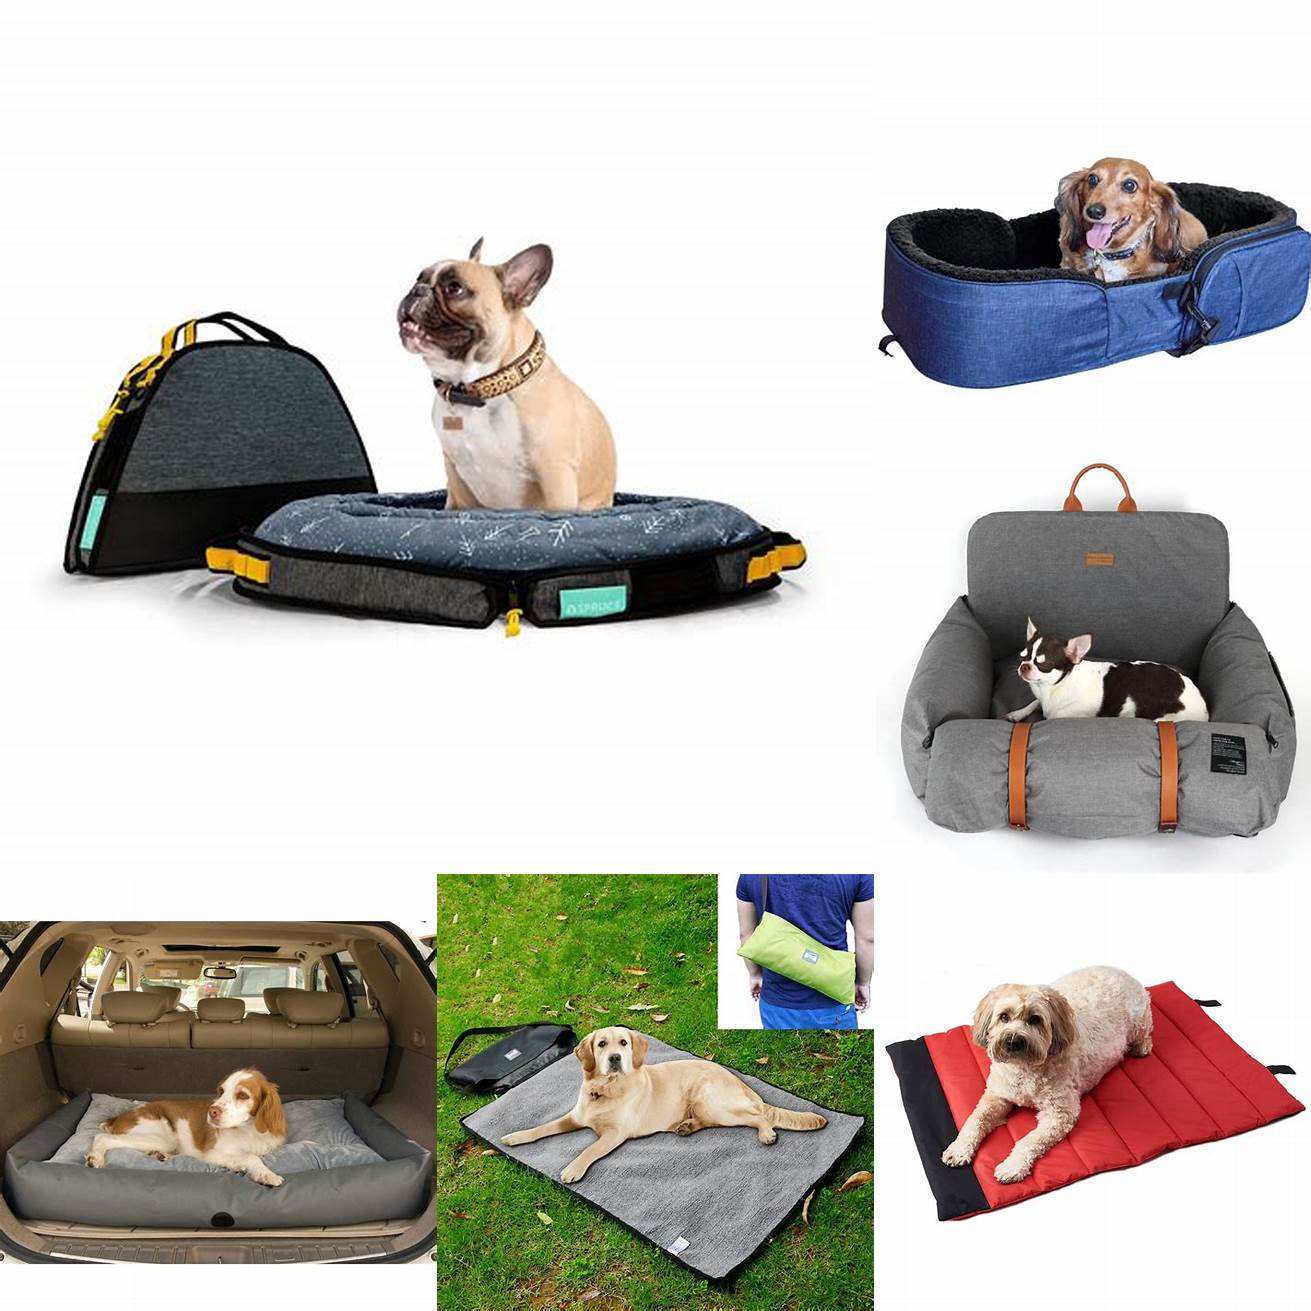 5 A travel bed for pets on the go